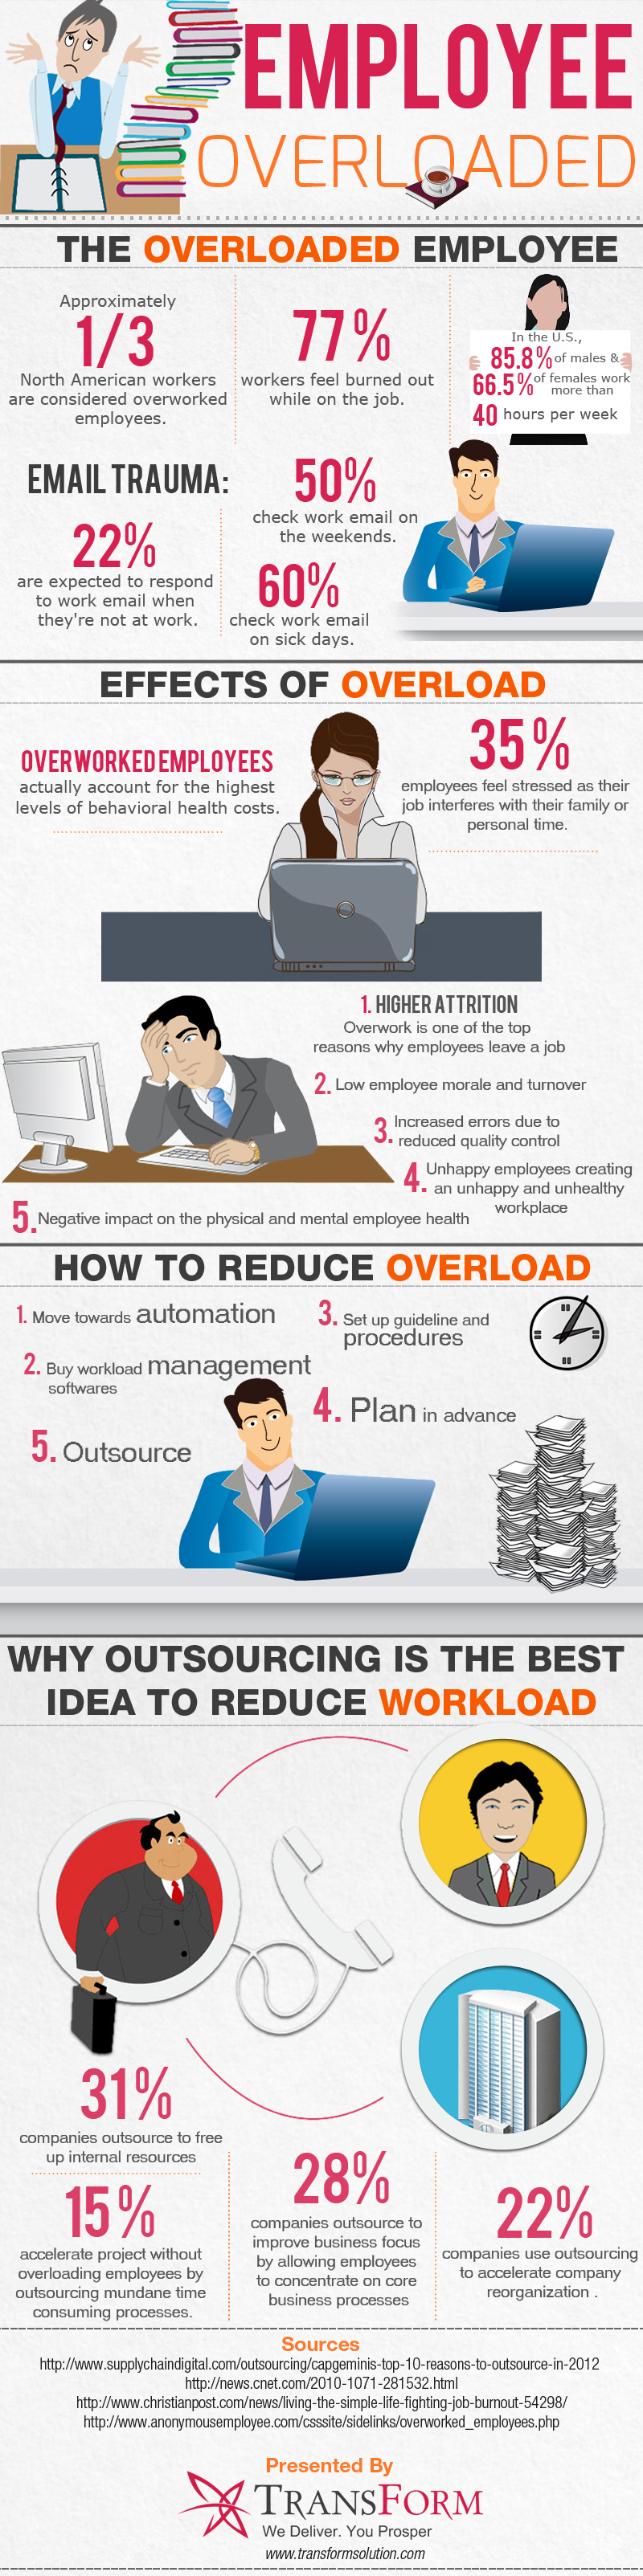 outsourcing-best-solution-to-reduce-employee-overload-infographic_52ff4bcd58889